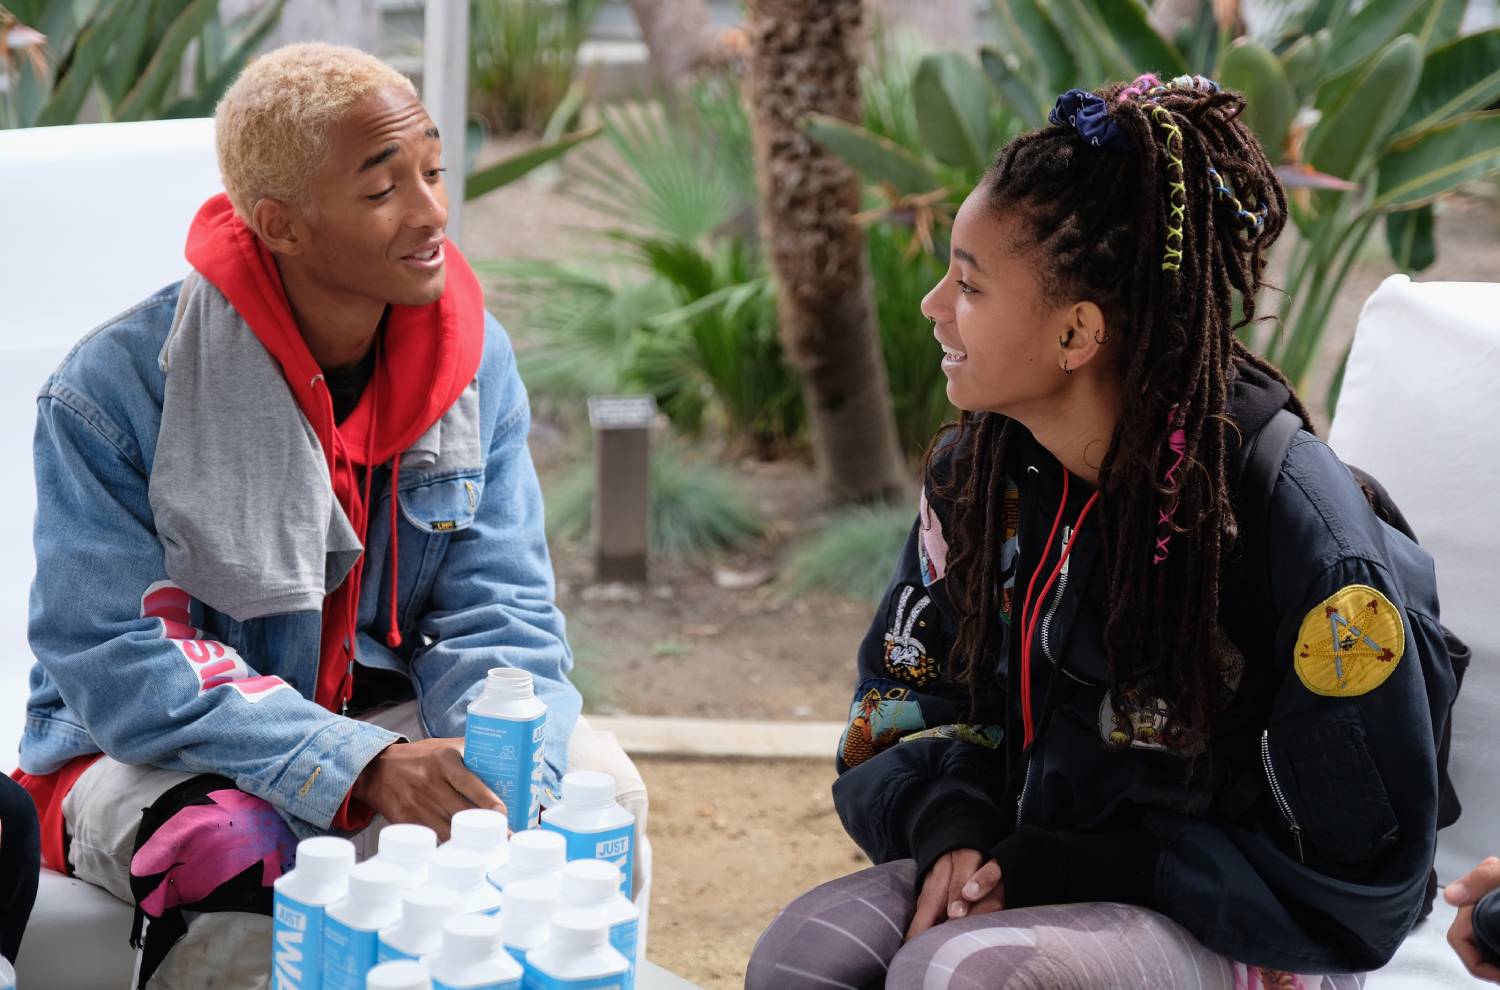 Jaden Smith and Willow Smith participate in the March for Our Lives Los Angeles rally on March 24, 2018 in Los Angeles, California. More than 800 March for Our Lives events, organized by survivors of the Parkland, Florida school shooting on February 14 that left 17 dead, are taking place around the world to call for legislative action to address school safety and gun violence.